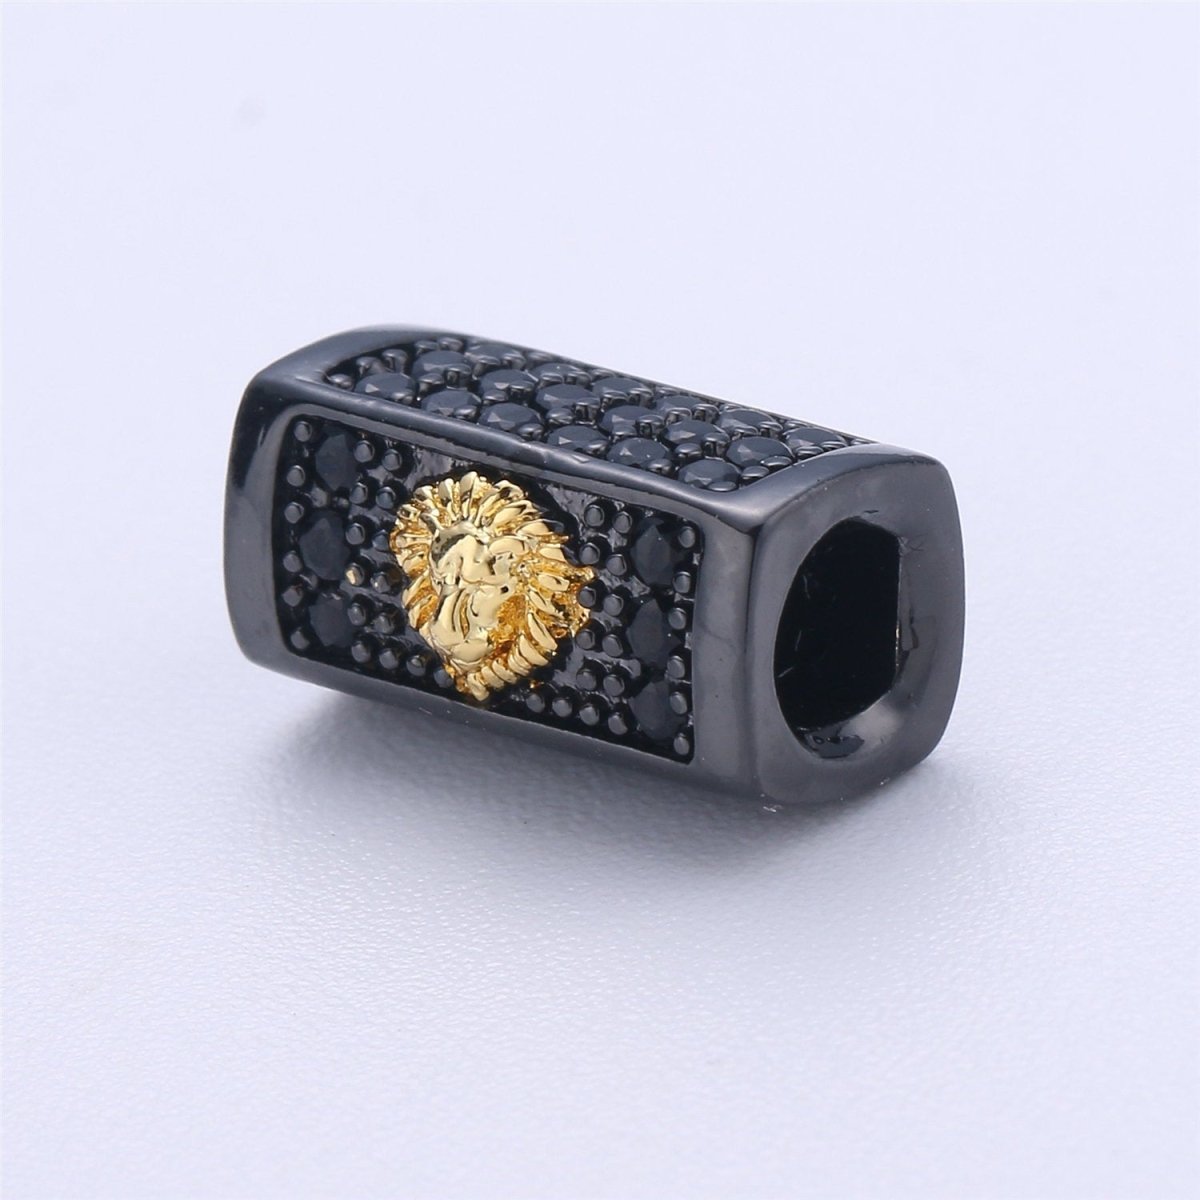 Tiger Bead Cuboid Tube Spacer Bead,Metal Pave Black CZ Long Bar Slider Charm for Men/Women Jewelry Making Supplies B-237 - DLUXCA